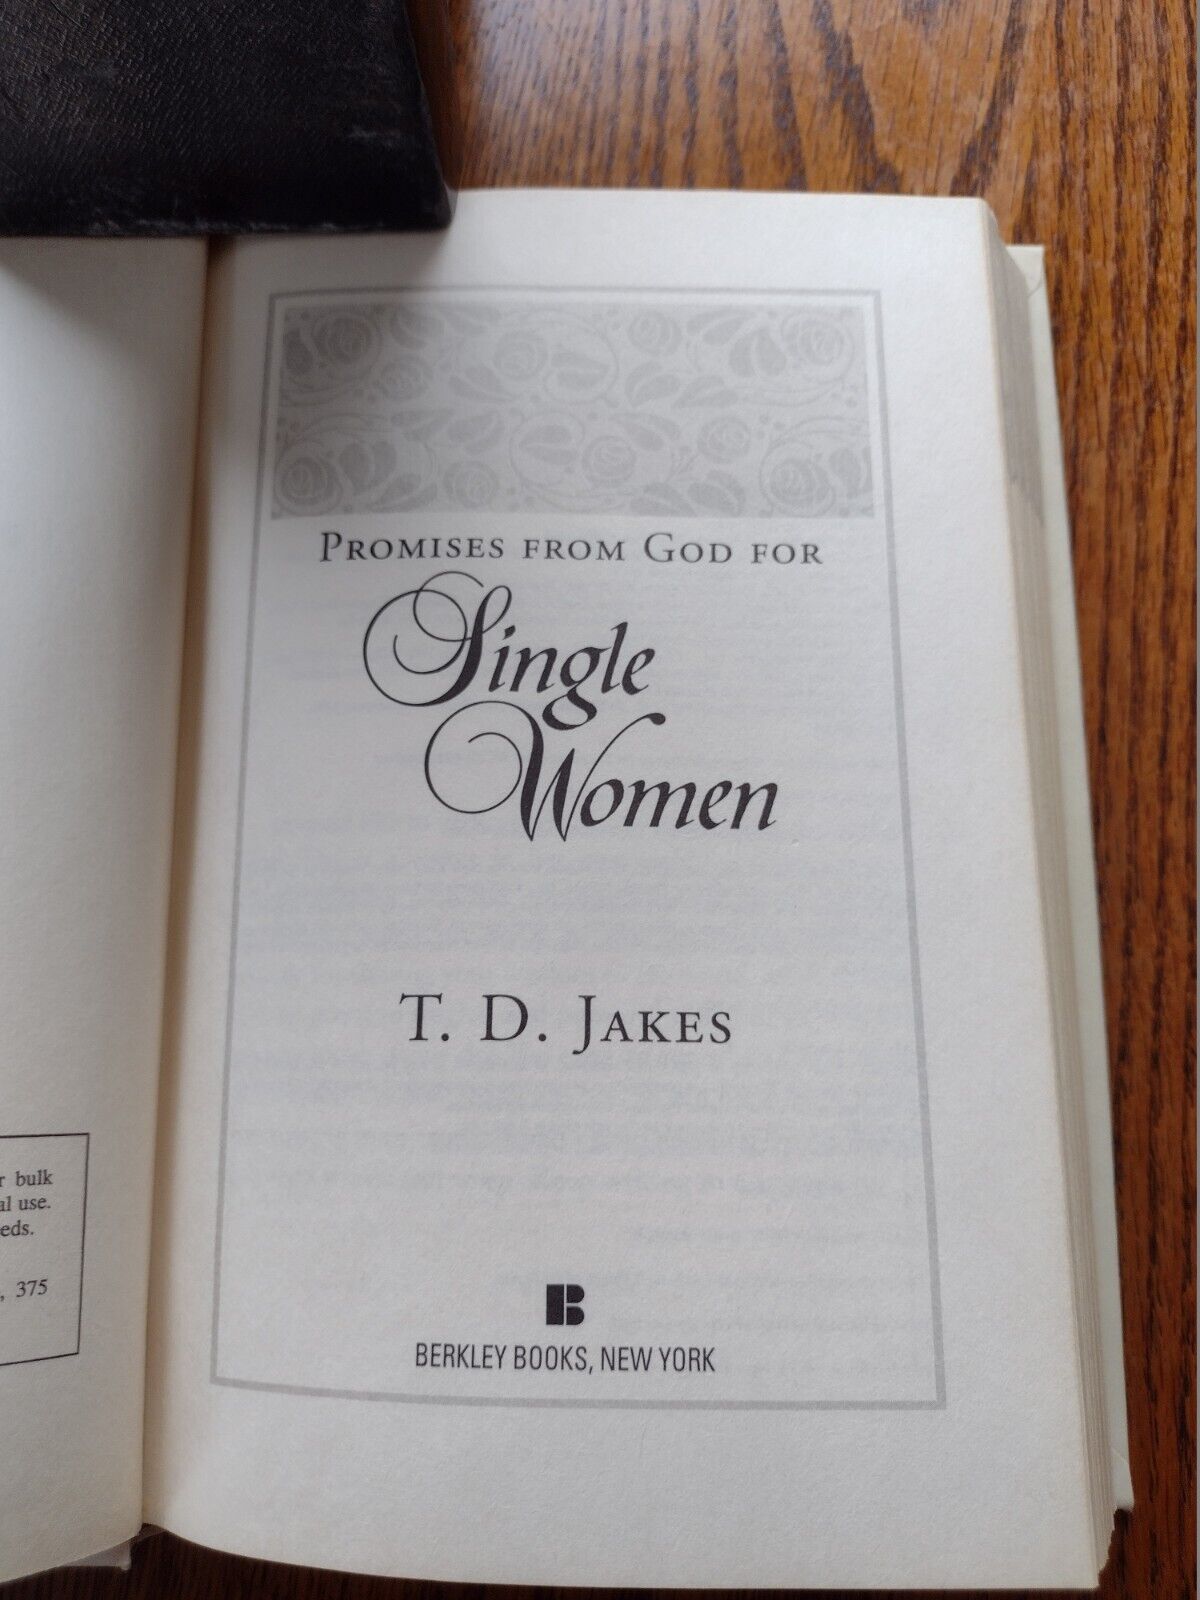 T . D . JAKES, PROMISES FROM GOD FOR SINGLE WOMEN, BOOK, USED.